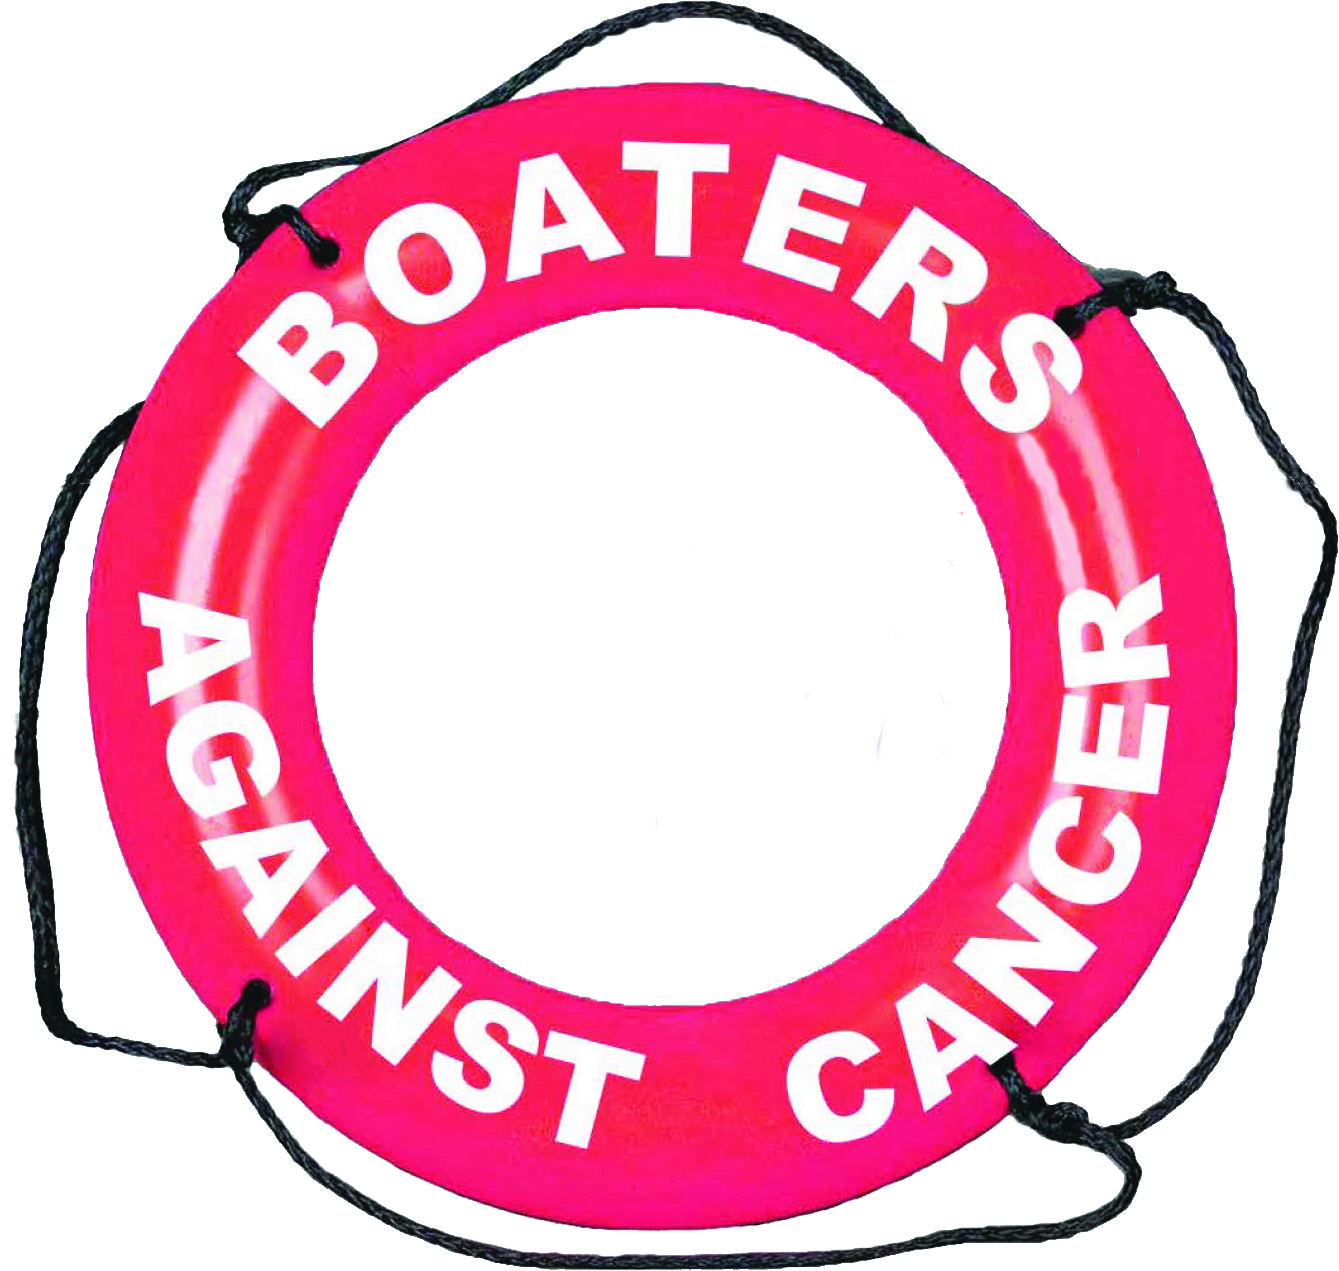 Boaters Against Cancer